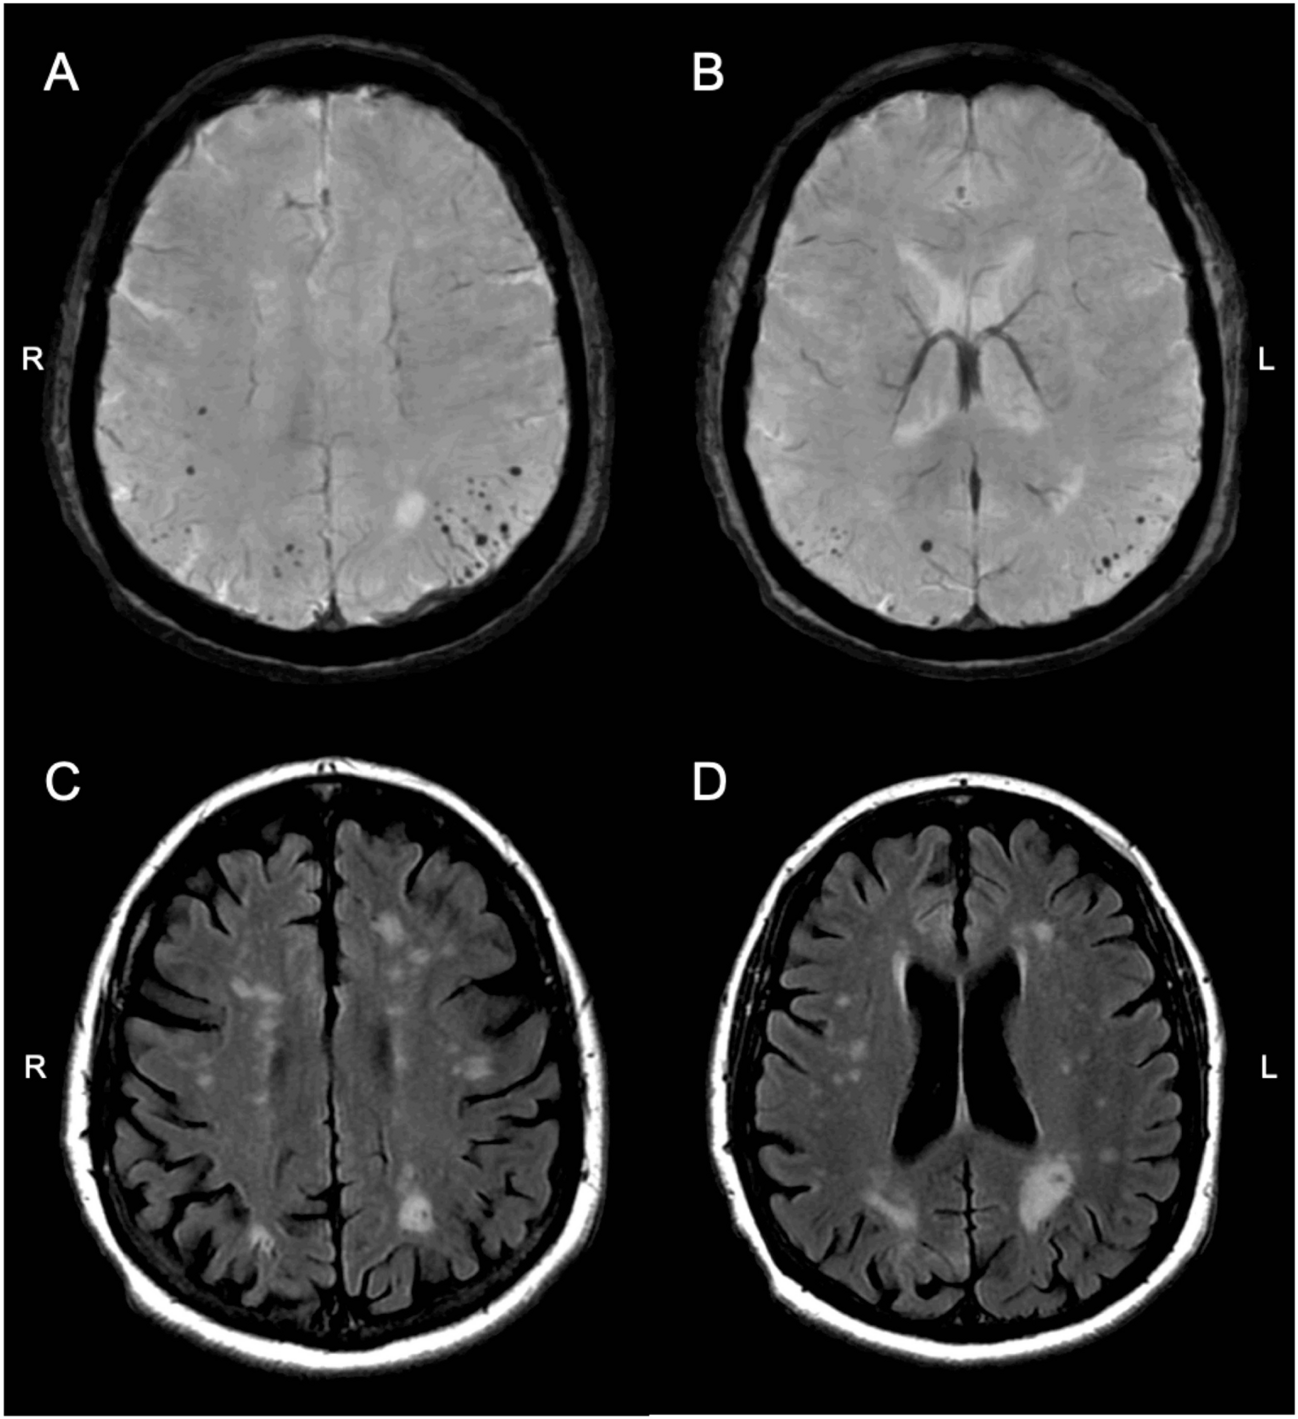 Lobar Microbleeds in the Posterior Cortical Atrophy Syndrome: A Comparison to Typical Alzheimer’s Disease